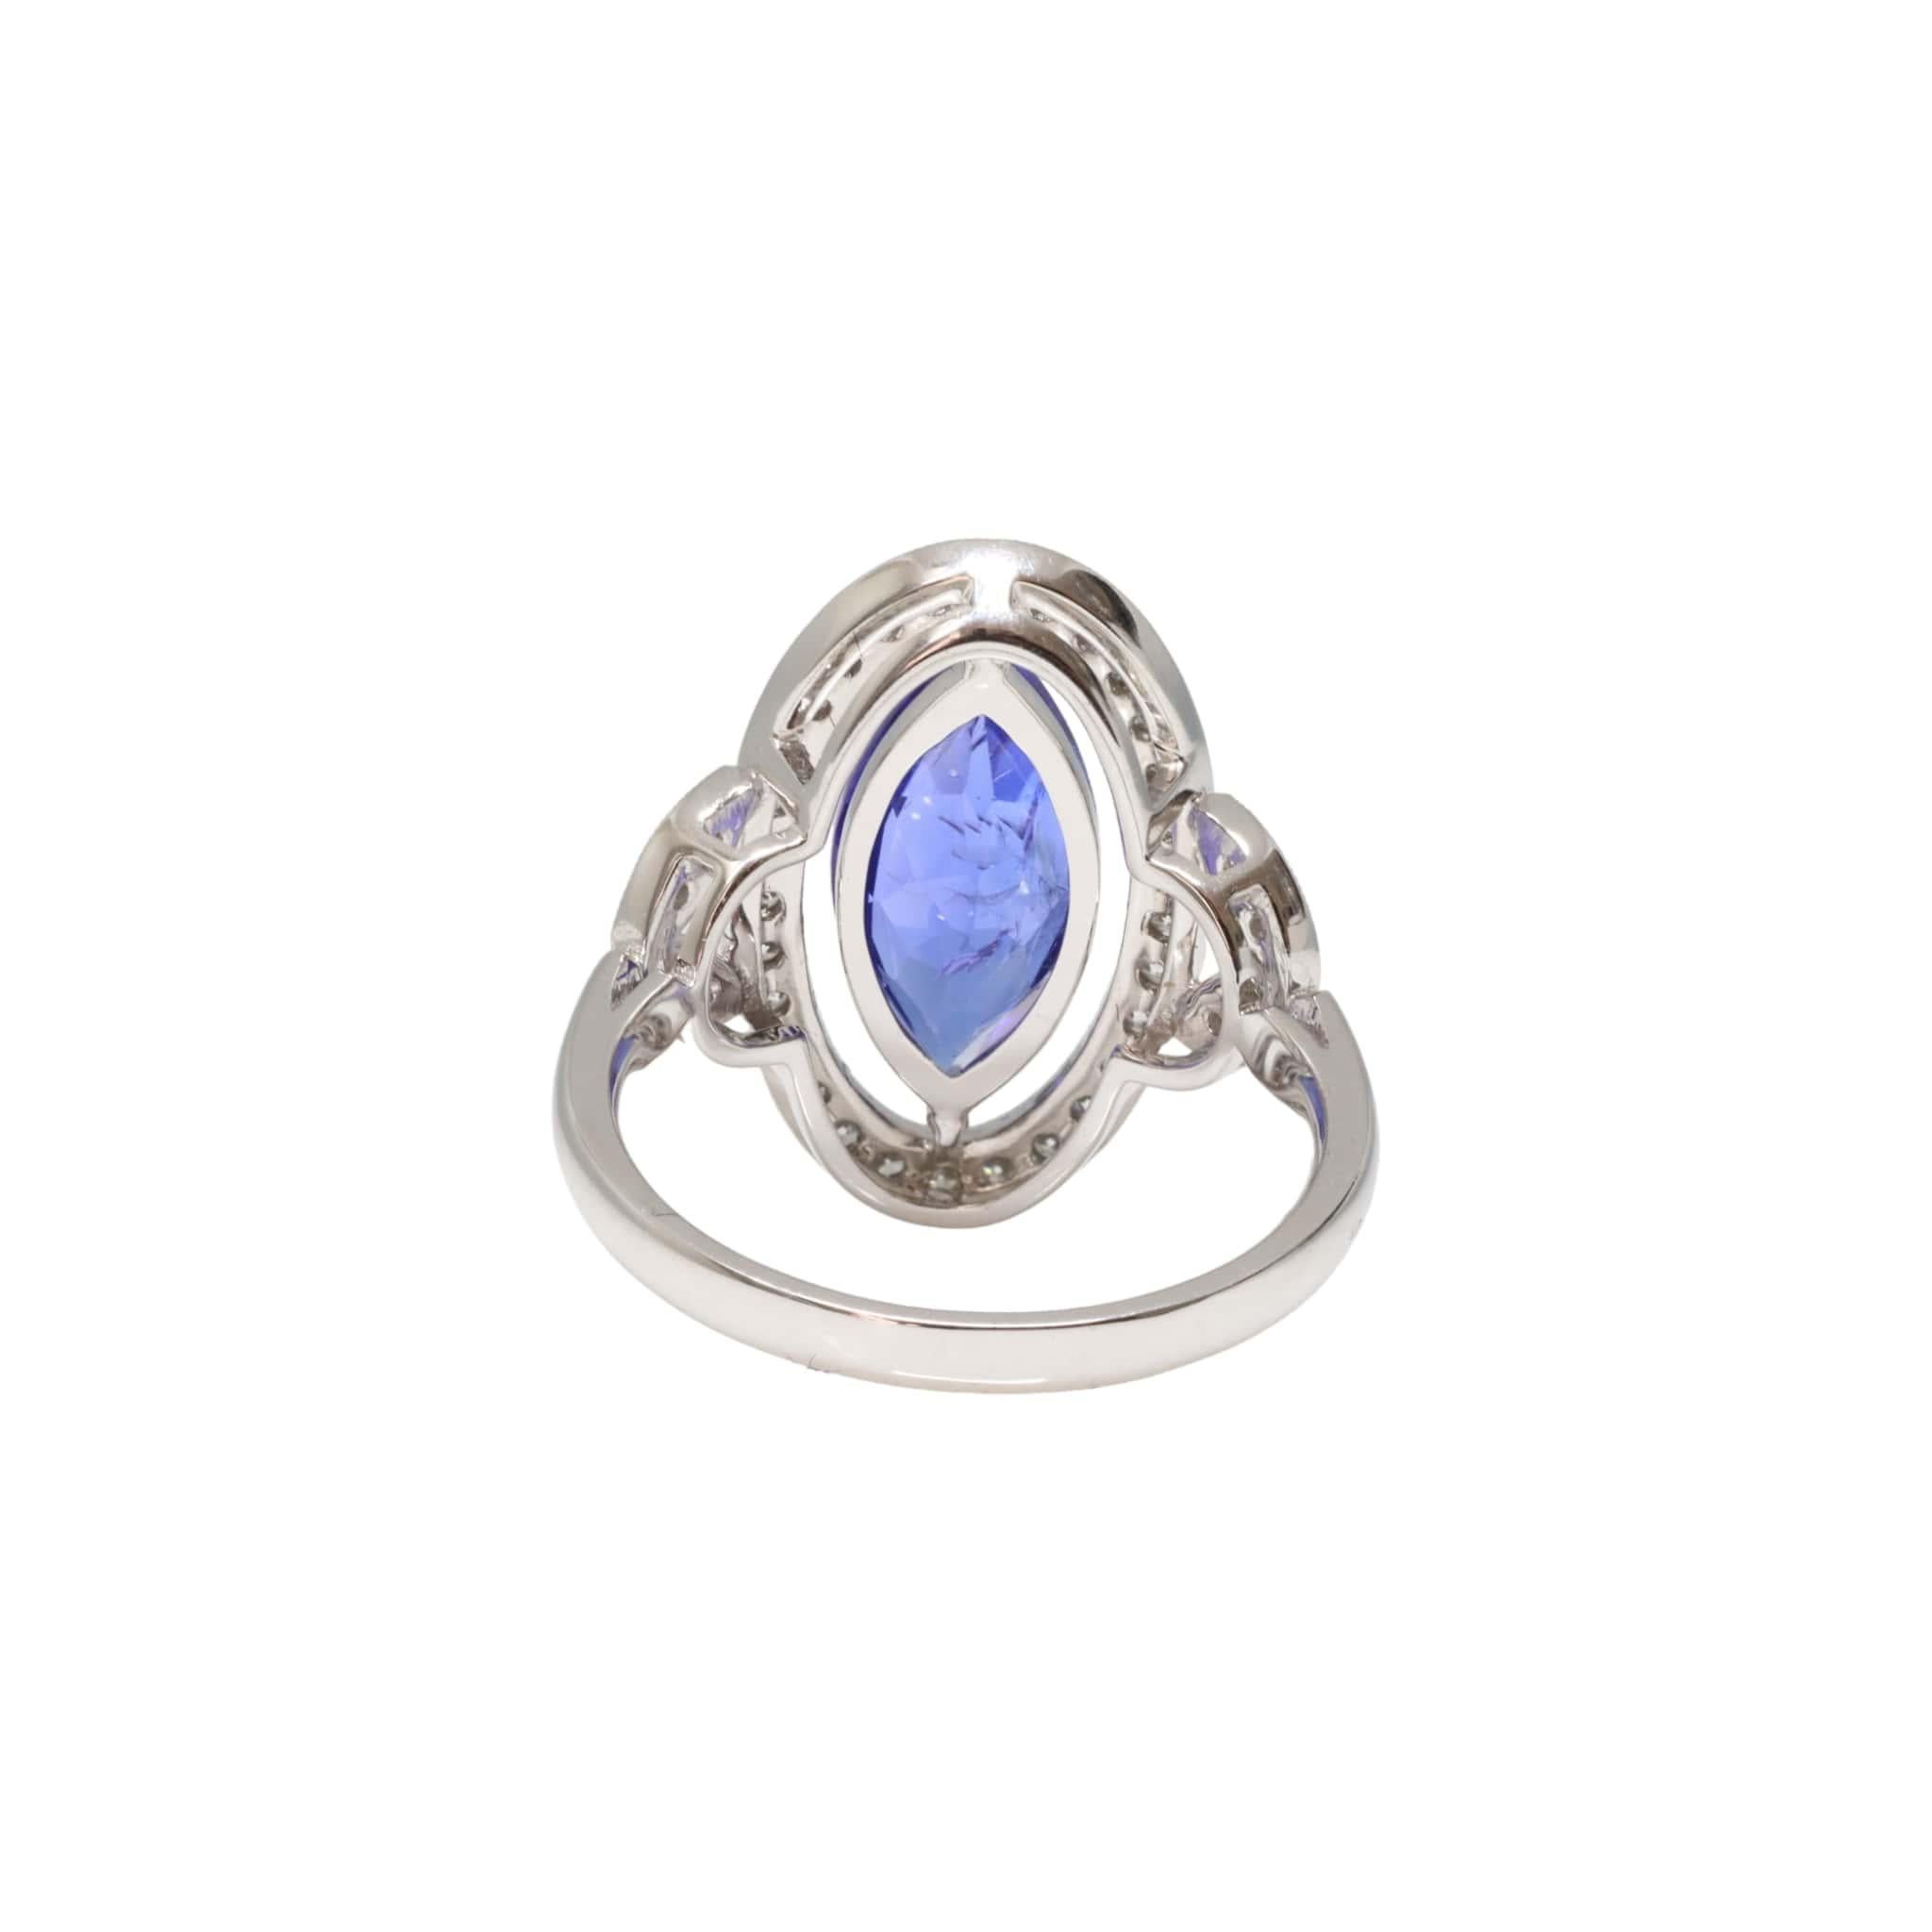 Item 1

One ladies - 18ct white gold dress ring, narrow, half round shank with open back, leaf-shaped shoulders 2 claw with single halo surround, polished finish. The item contains:

One claw set marquise tanzanite, colour is 